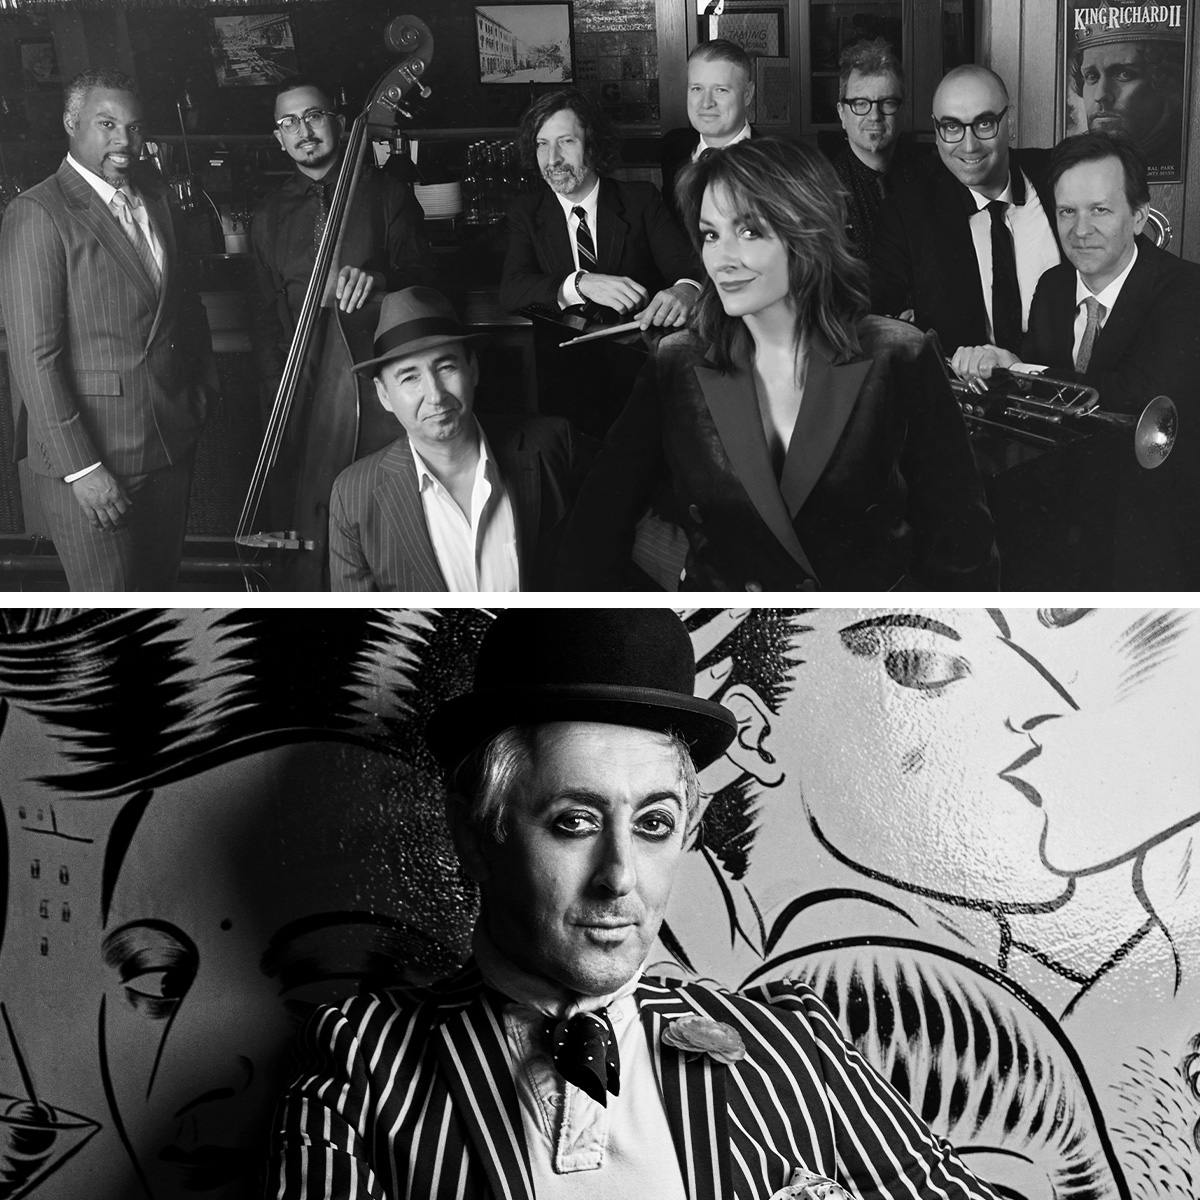 The Hot Sardines in Classical Music